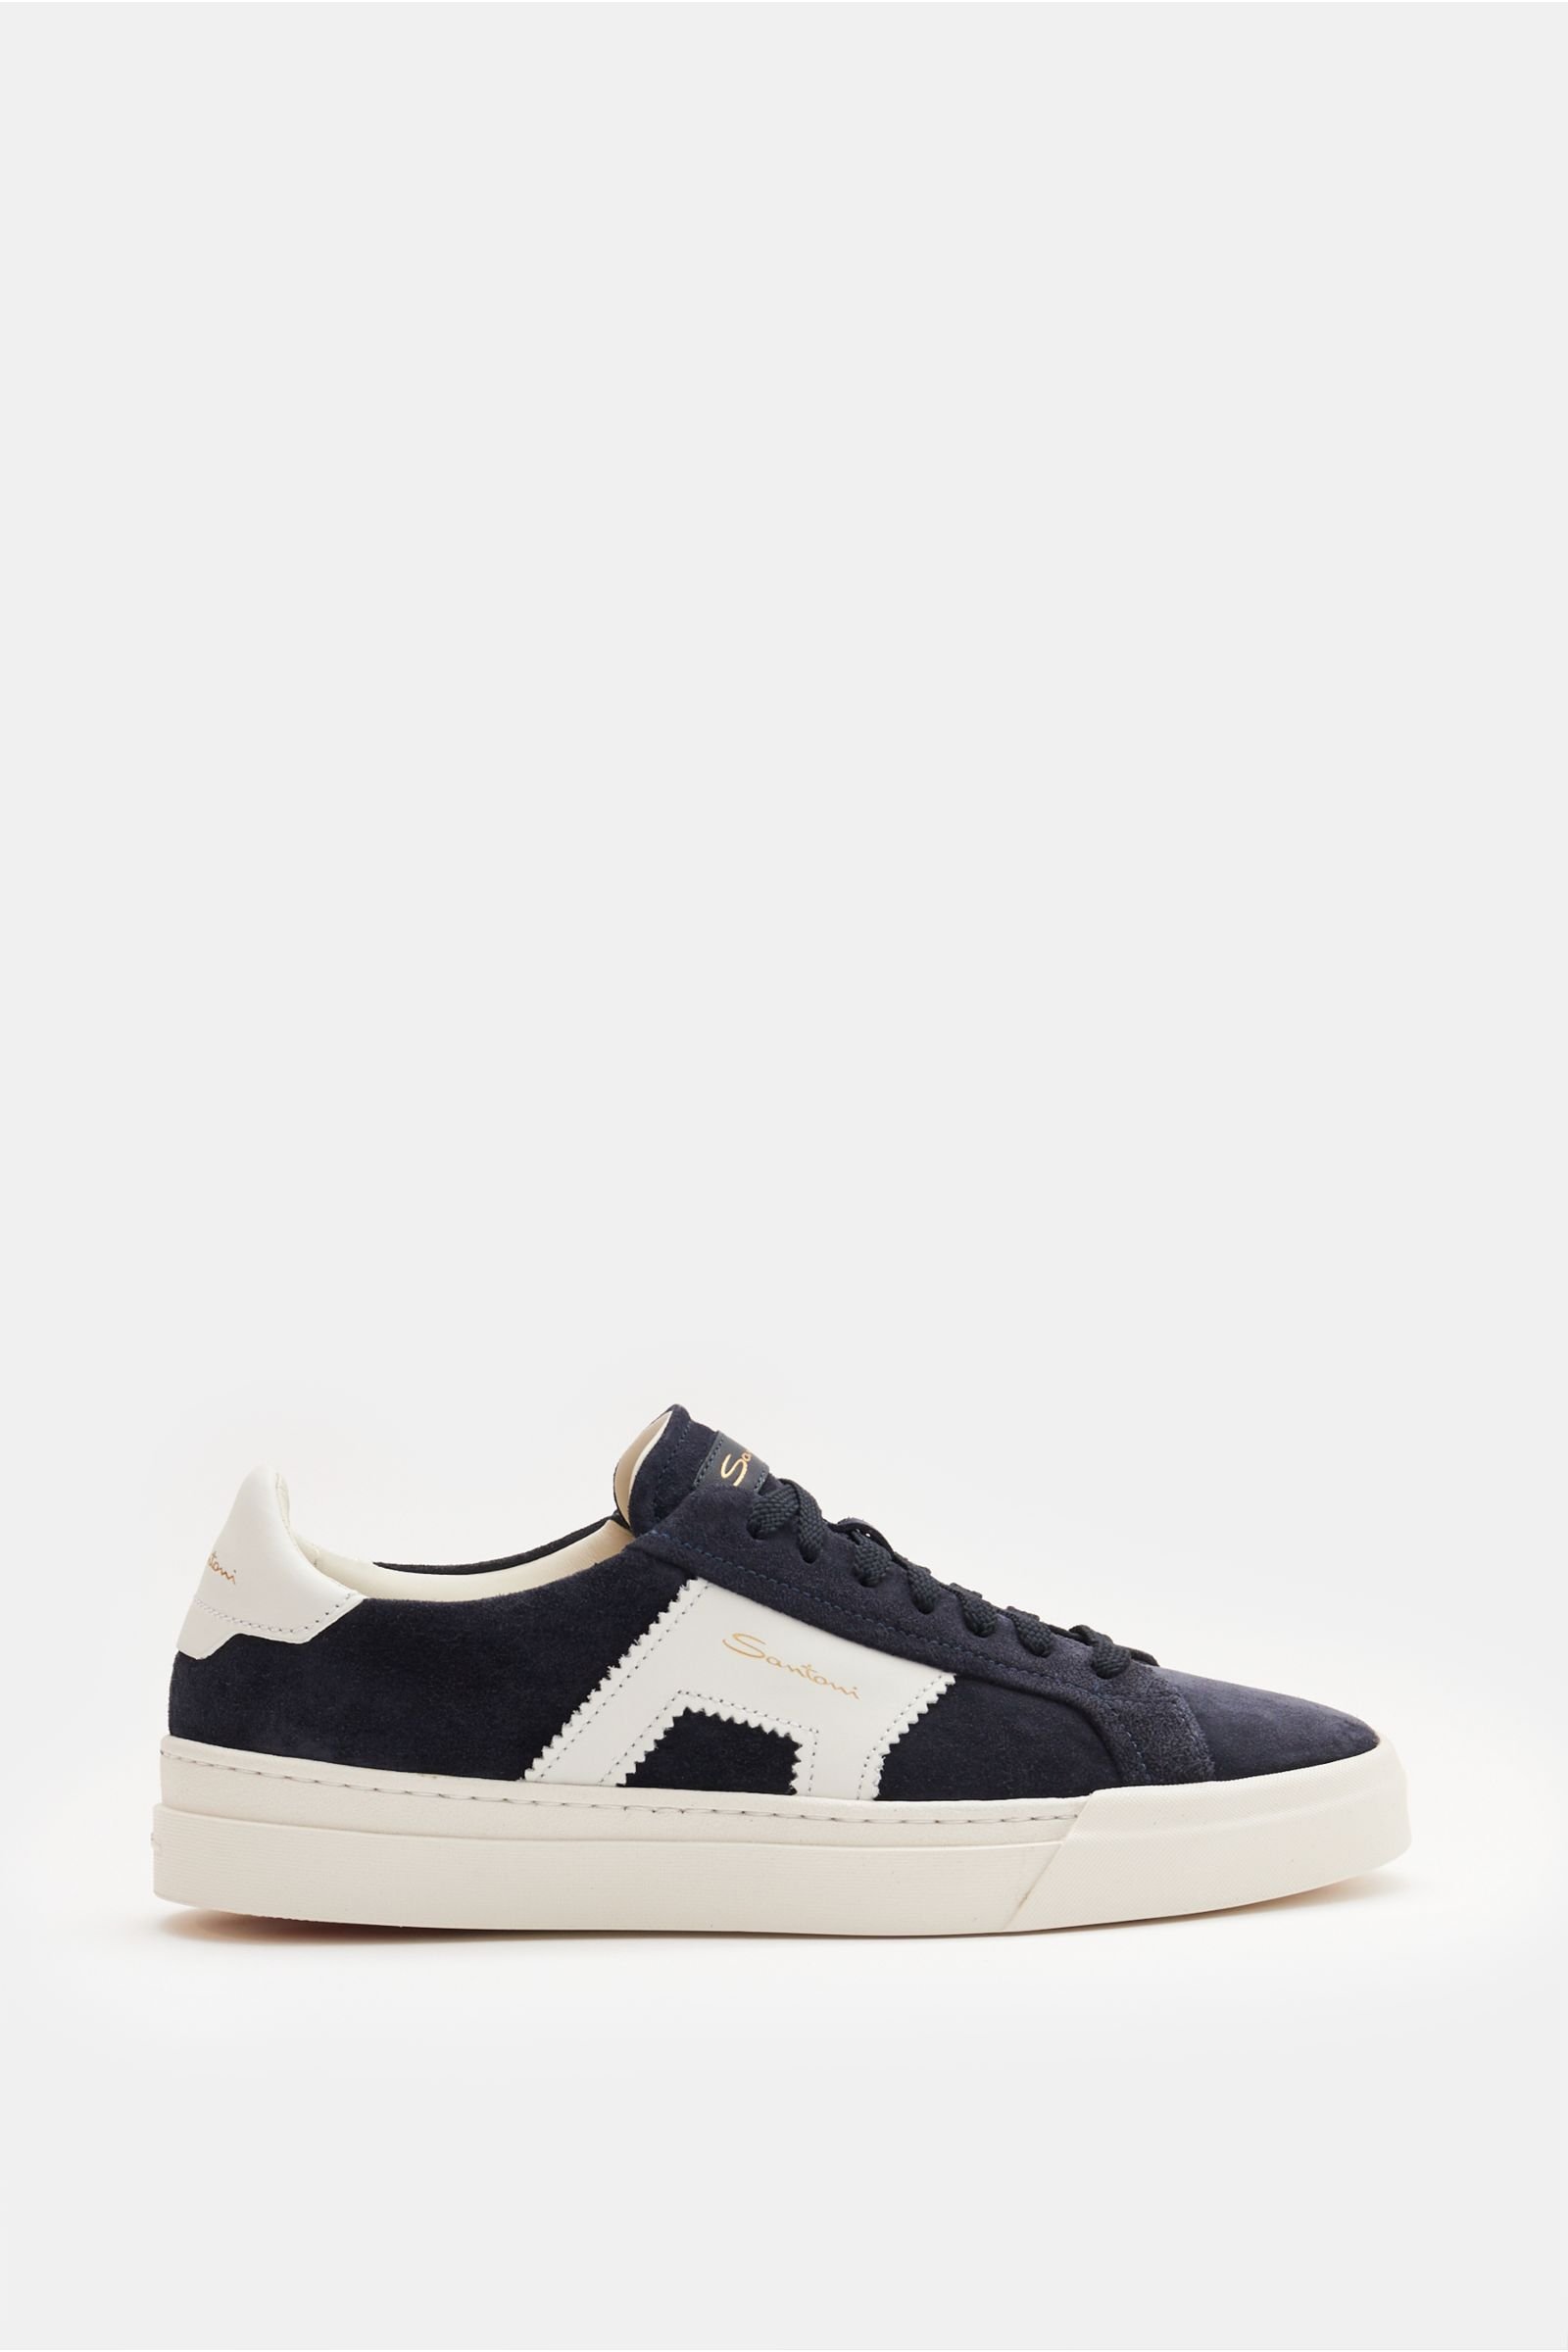 Sneakers 'Double Buckle' navy/white